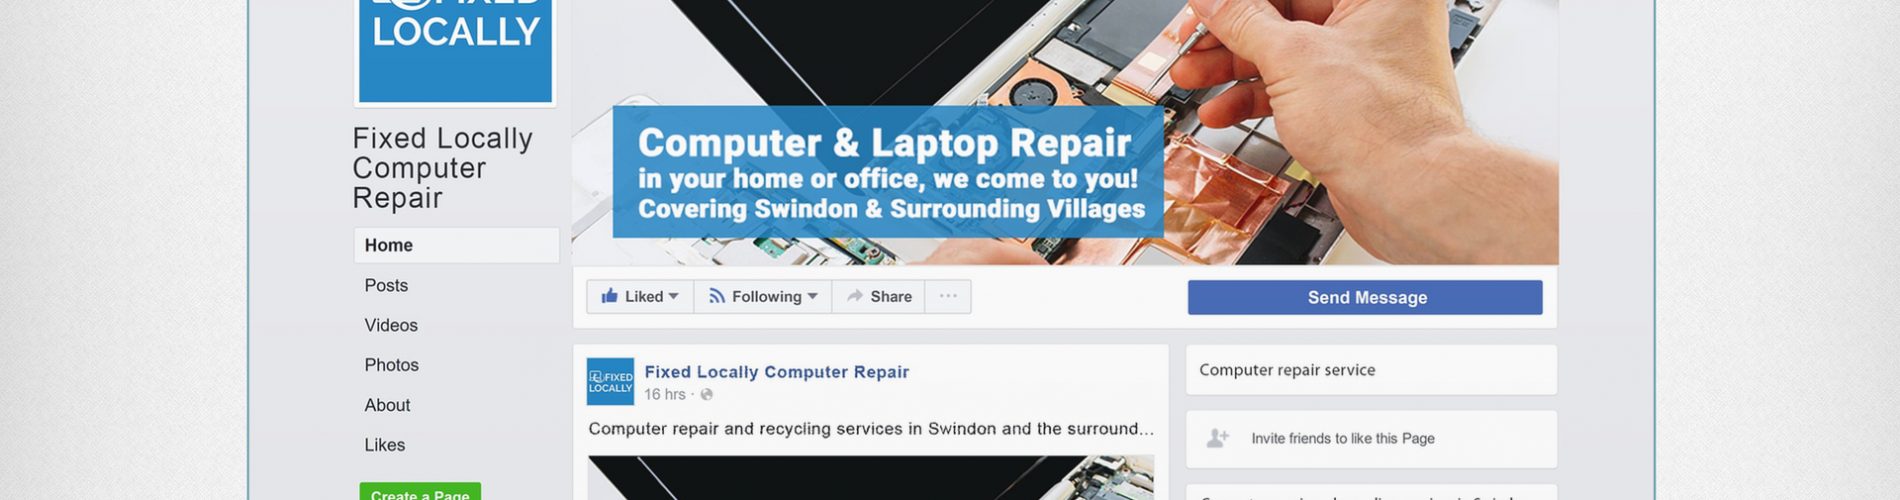 Fixed Locally Facebook page screen